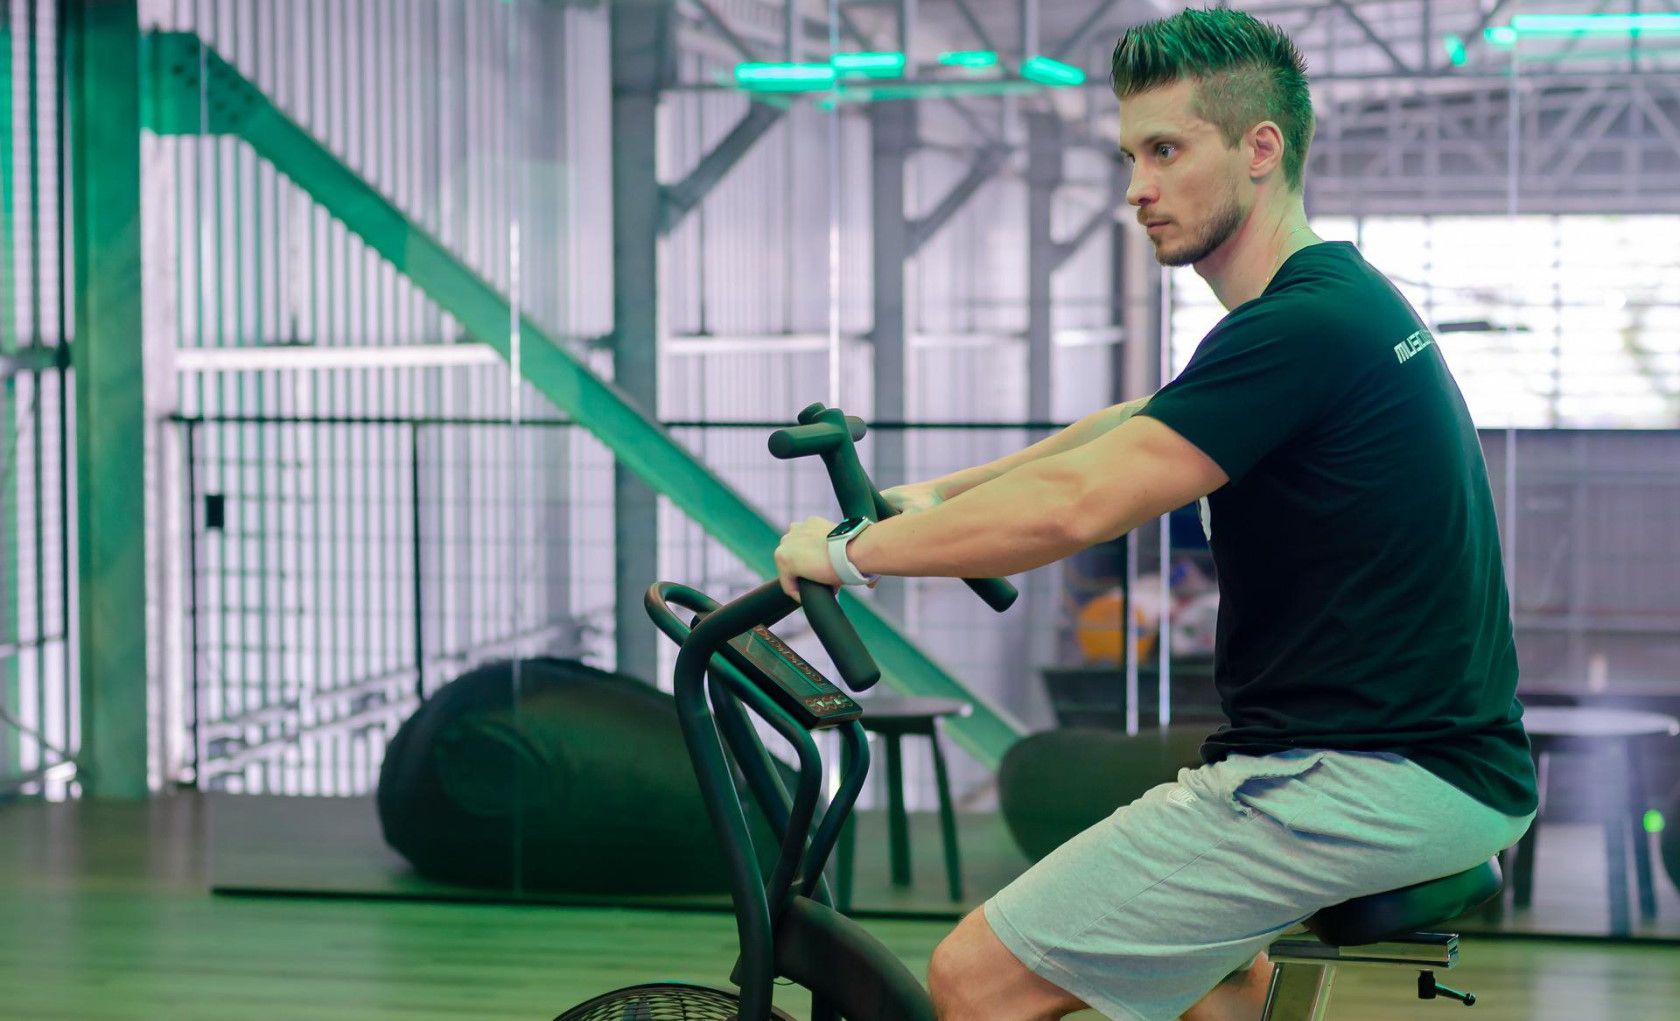 Man sitting on indoor stationary exercise bicycle